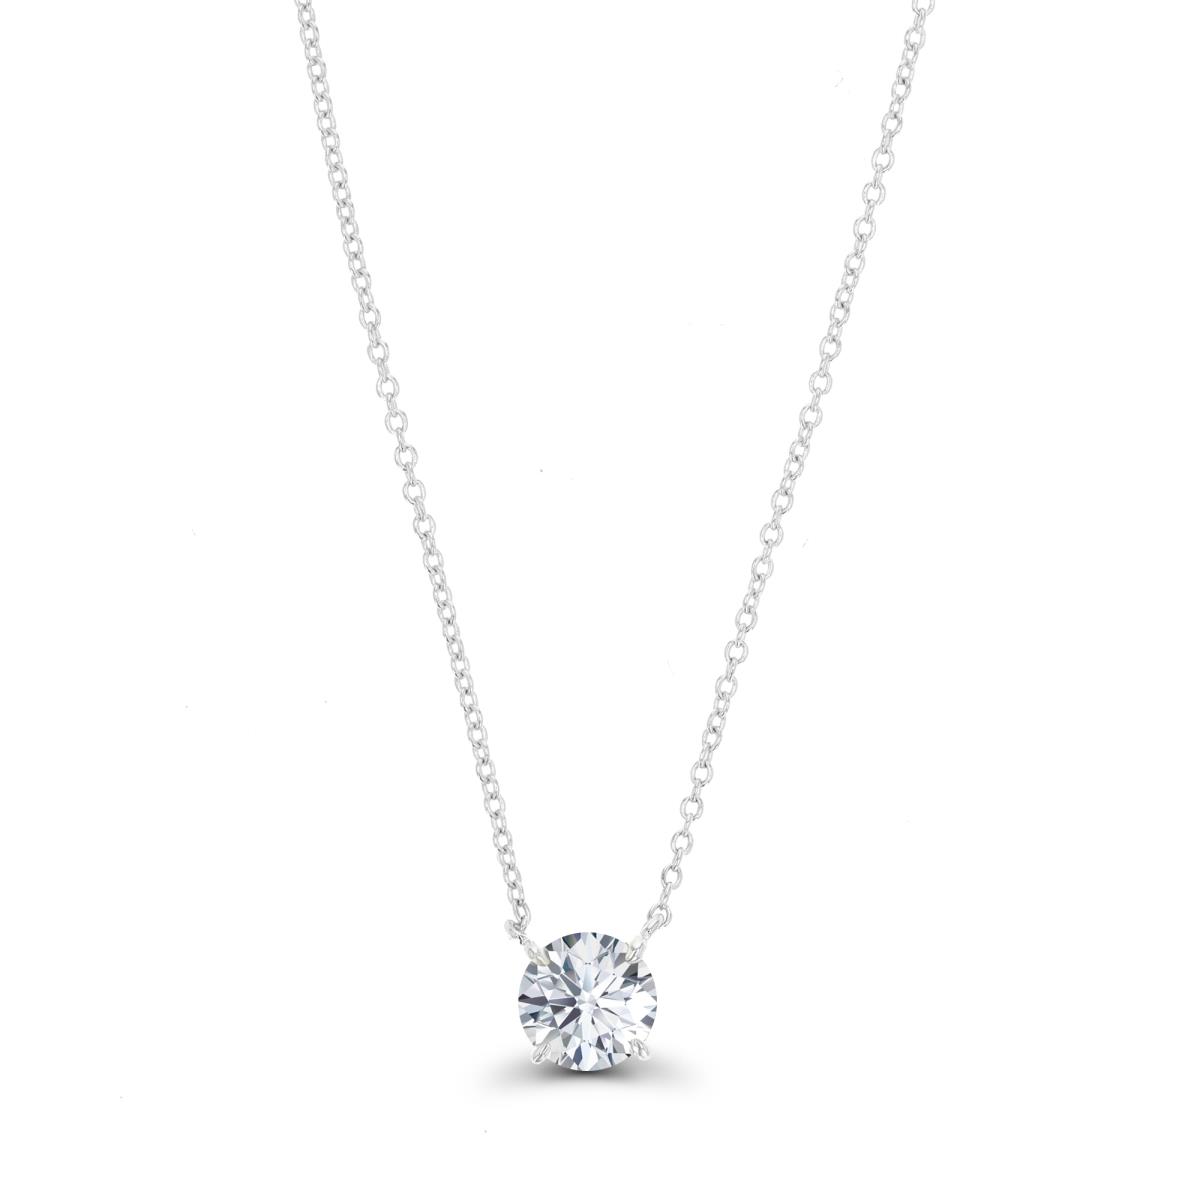 14K White & 6MM RD Ct. Cr. White Sapphire Solitaire 16+2" Necklace